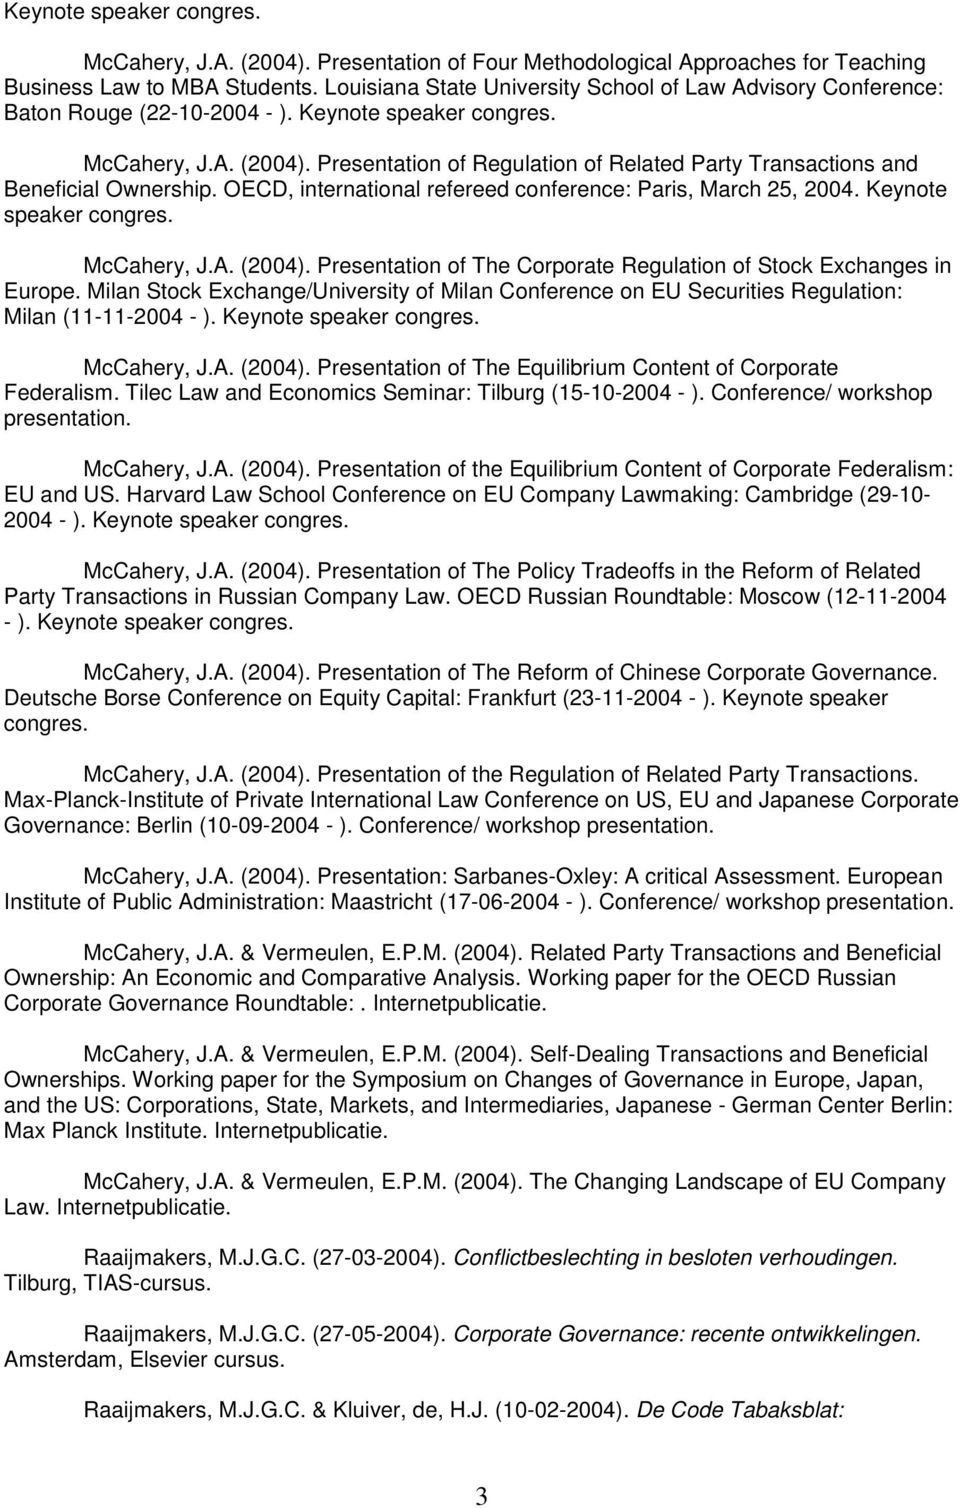 Presentation of Regulation of Related Party Transactions and Beneficial Ownership. OECD, international refereed conference: Paris, March 25, 2004. Keynote speaker congres. McCahery, J.A. (2004).